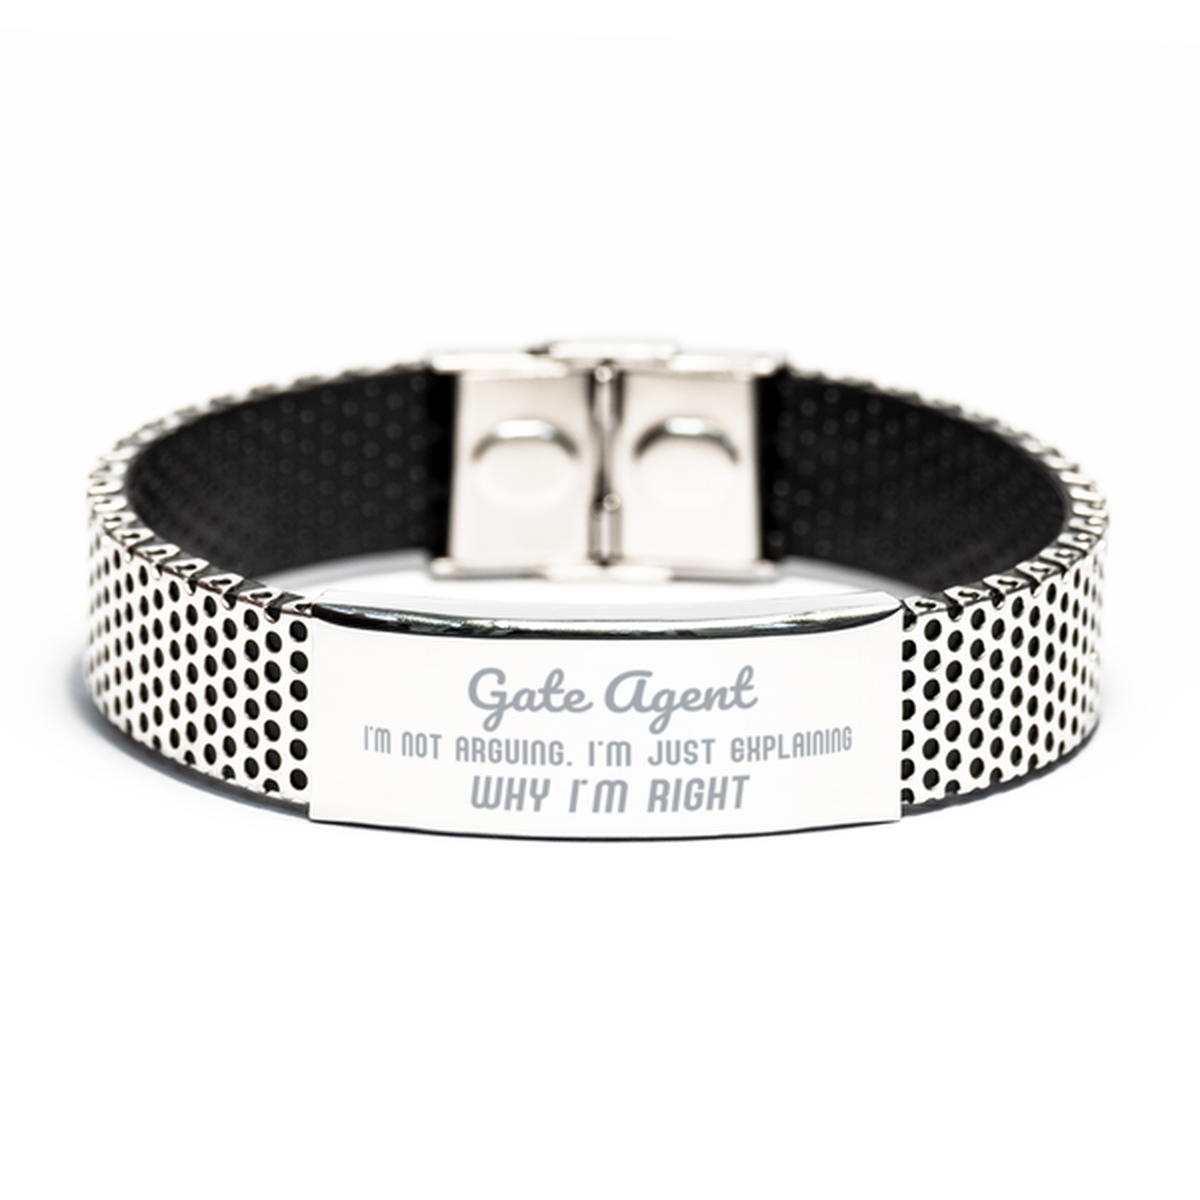 Gate Agent I'm not Arguing. I'm Just Explaining Why I'm RIGHT Stainless Steel Bracelet, Funny Saying Quote Gate Agent Gifts For Gate Agent Graduation Birthday Christmas Gifts for Men Women Coworker